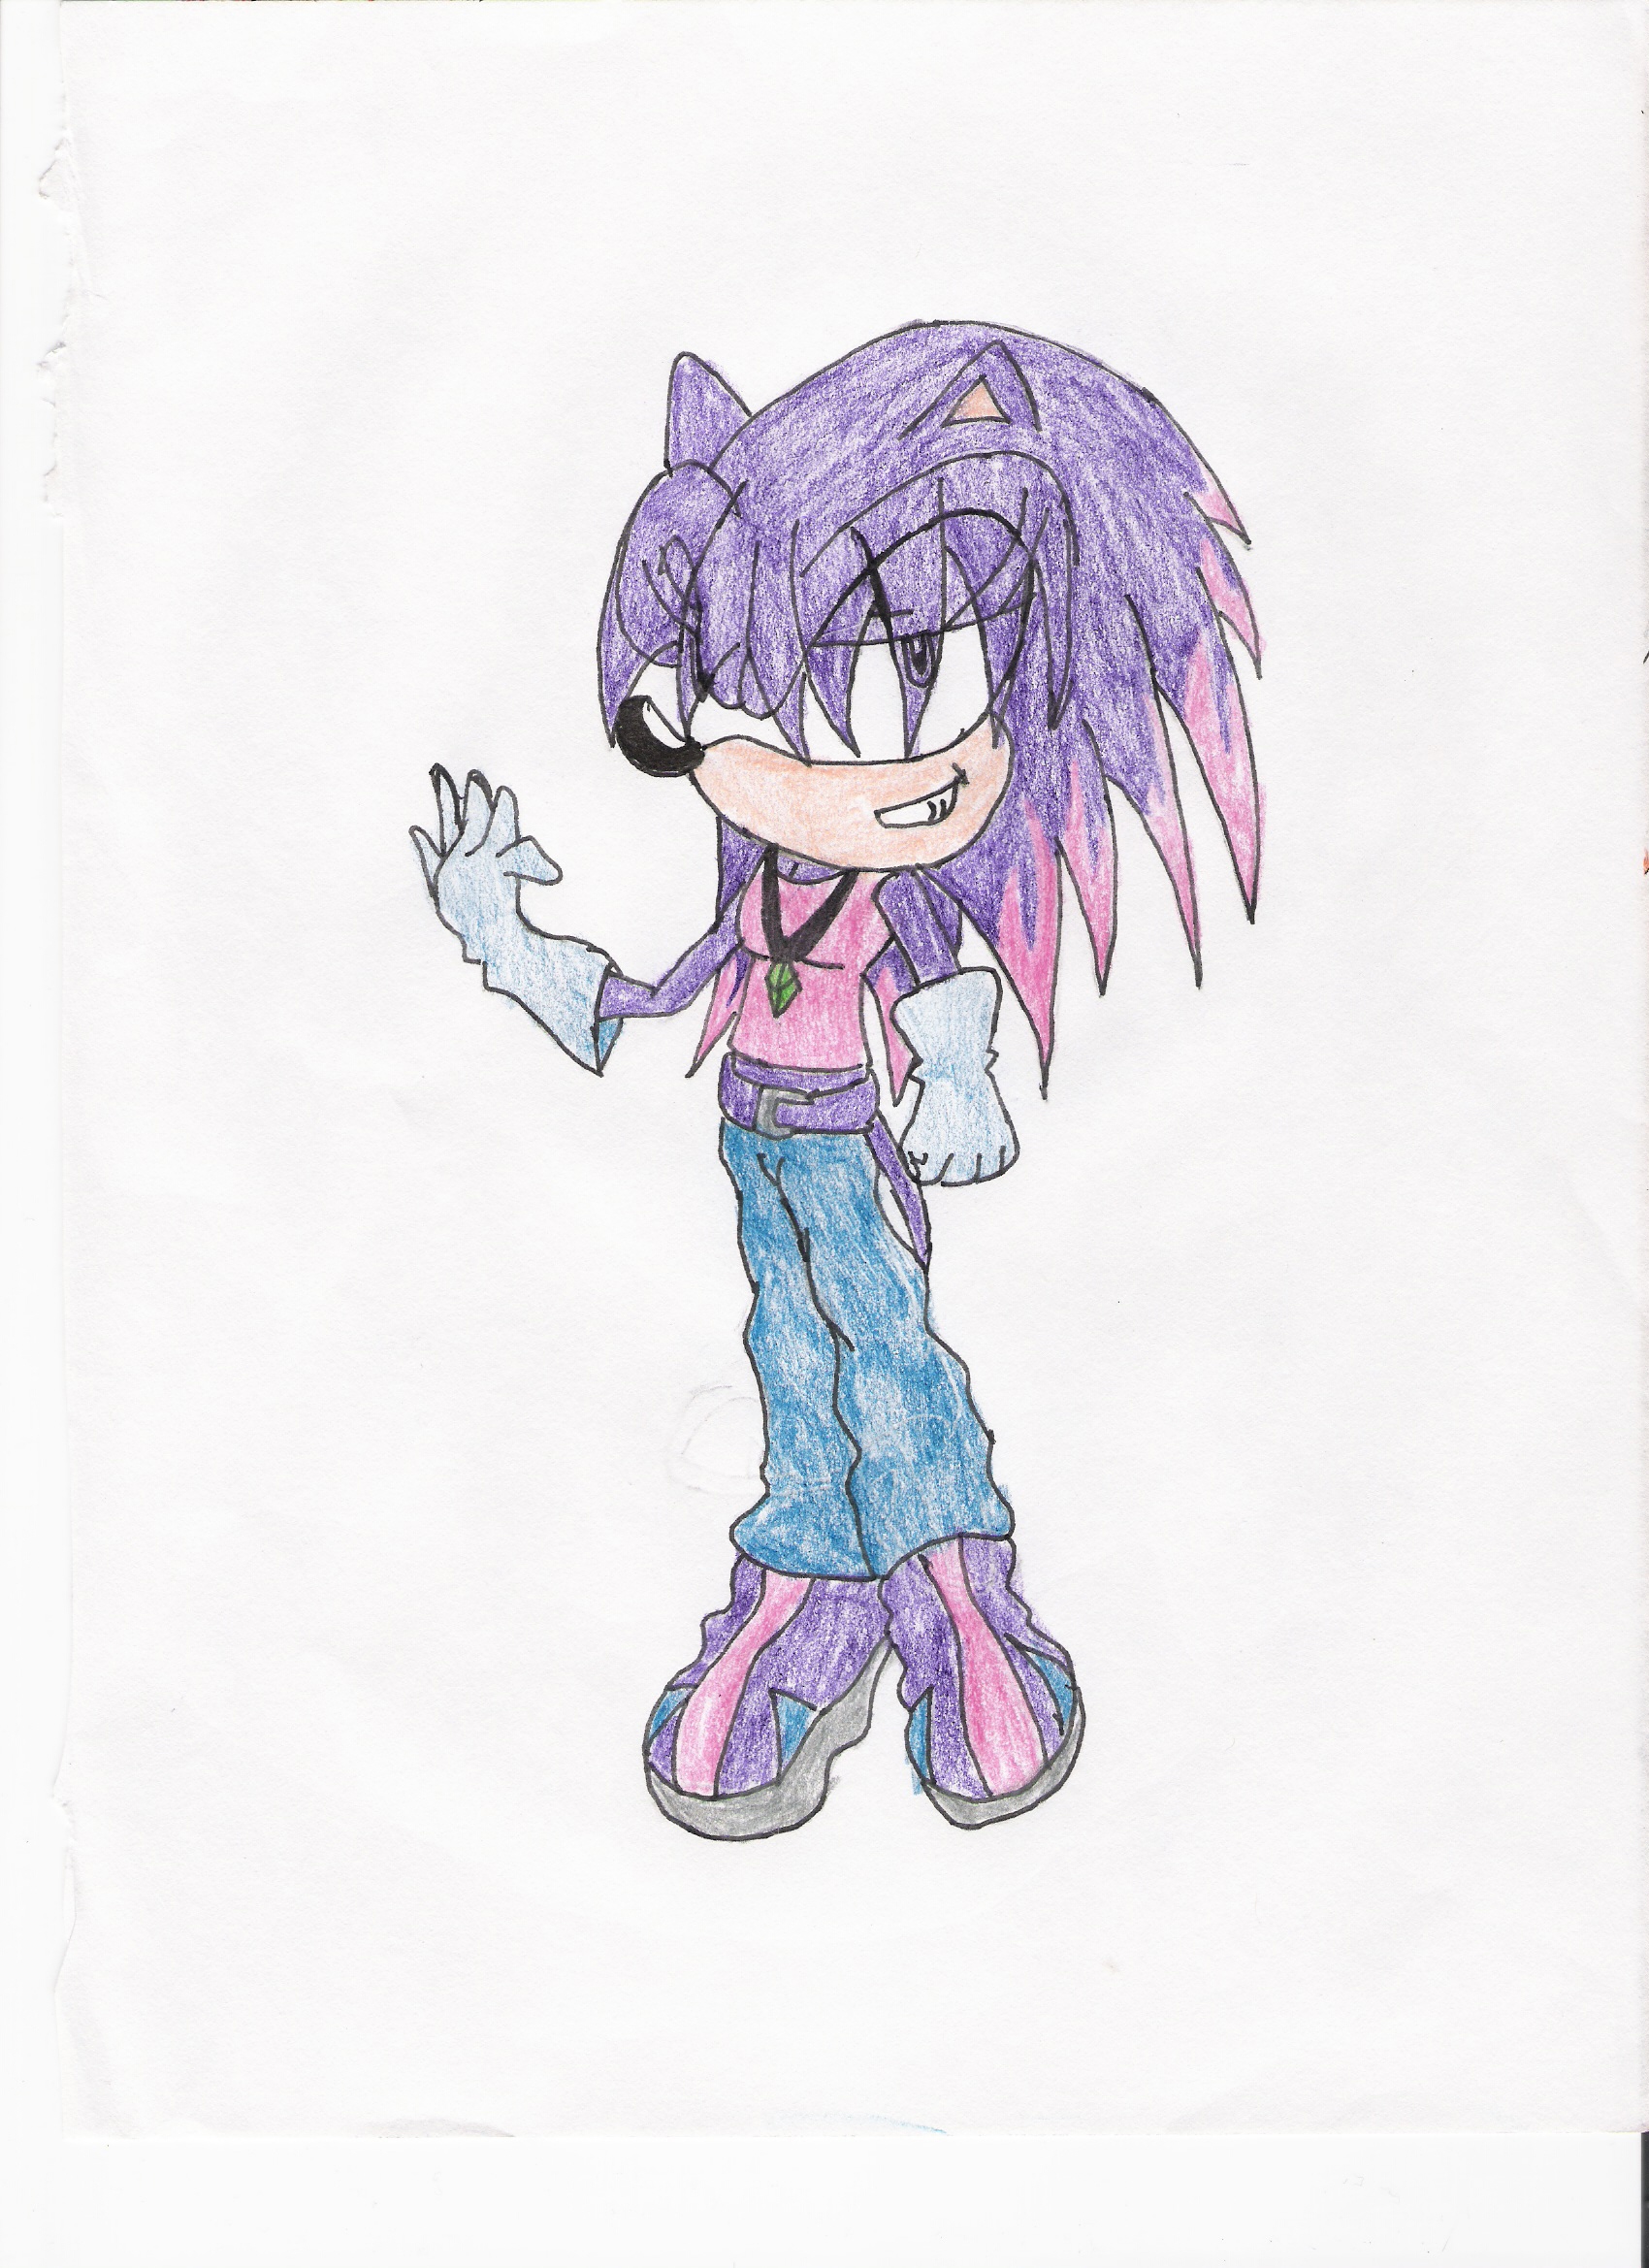 Entry for Brett the Hedgehog's contest by Knuxs_1_fan